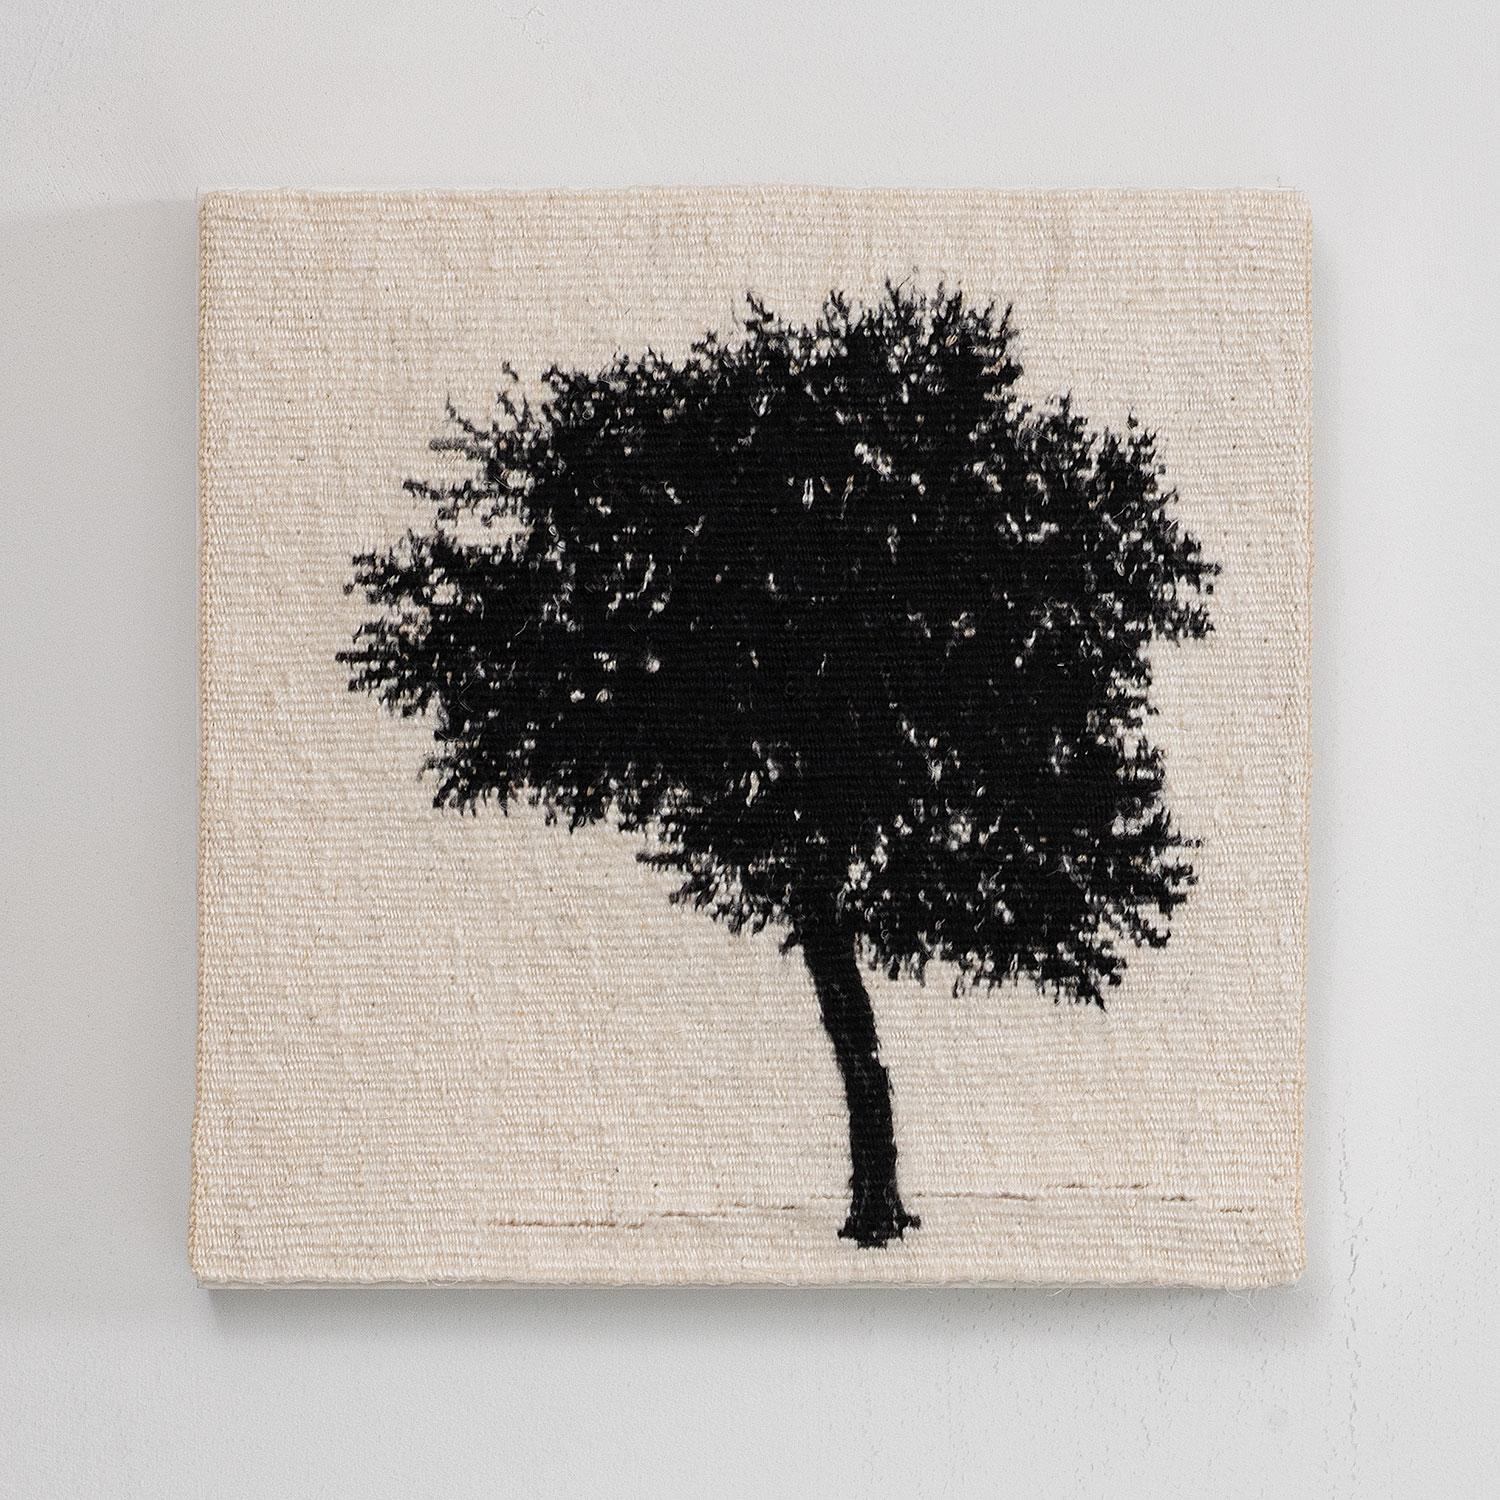 Journey Trees III, linens and swing threads, 8" x 8" x 1", 2021.

This figurative woven textile piece is by UK-based textile artist, Sara Brennan (b. 1963, Edinburgh, Scotland). She says, "Journey Trees is a series of tapestries drawn and woven from